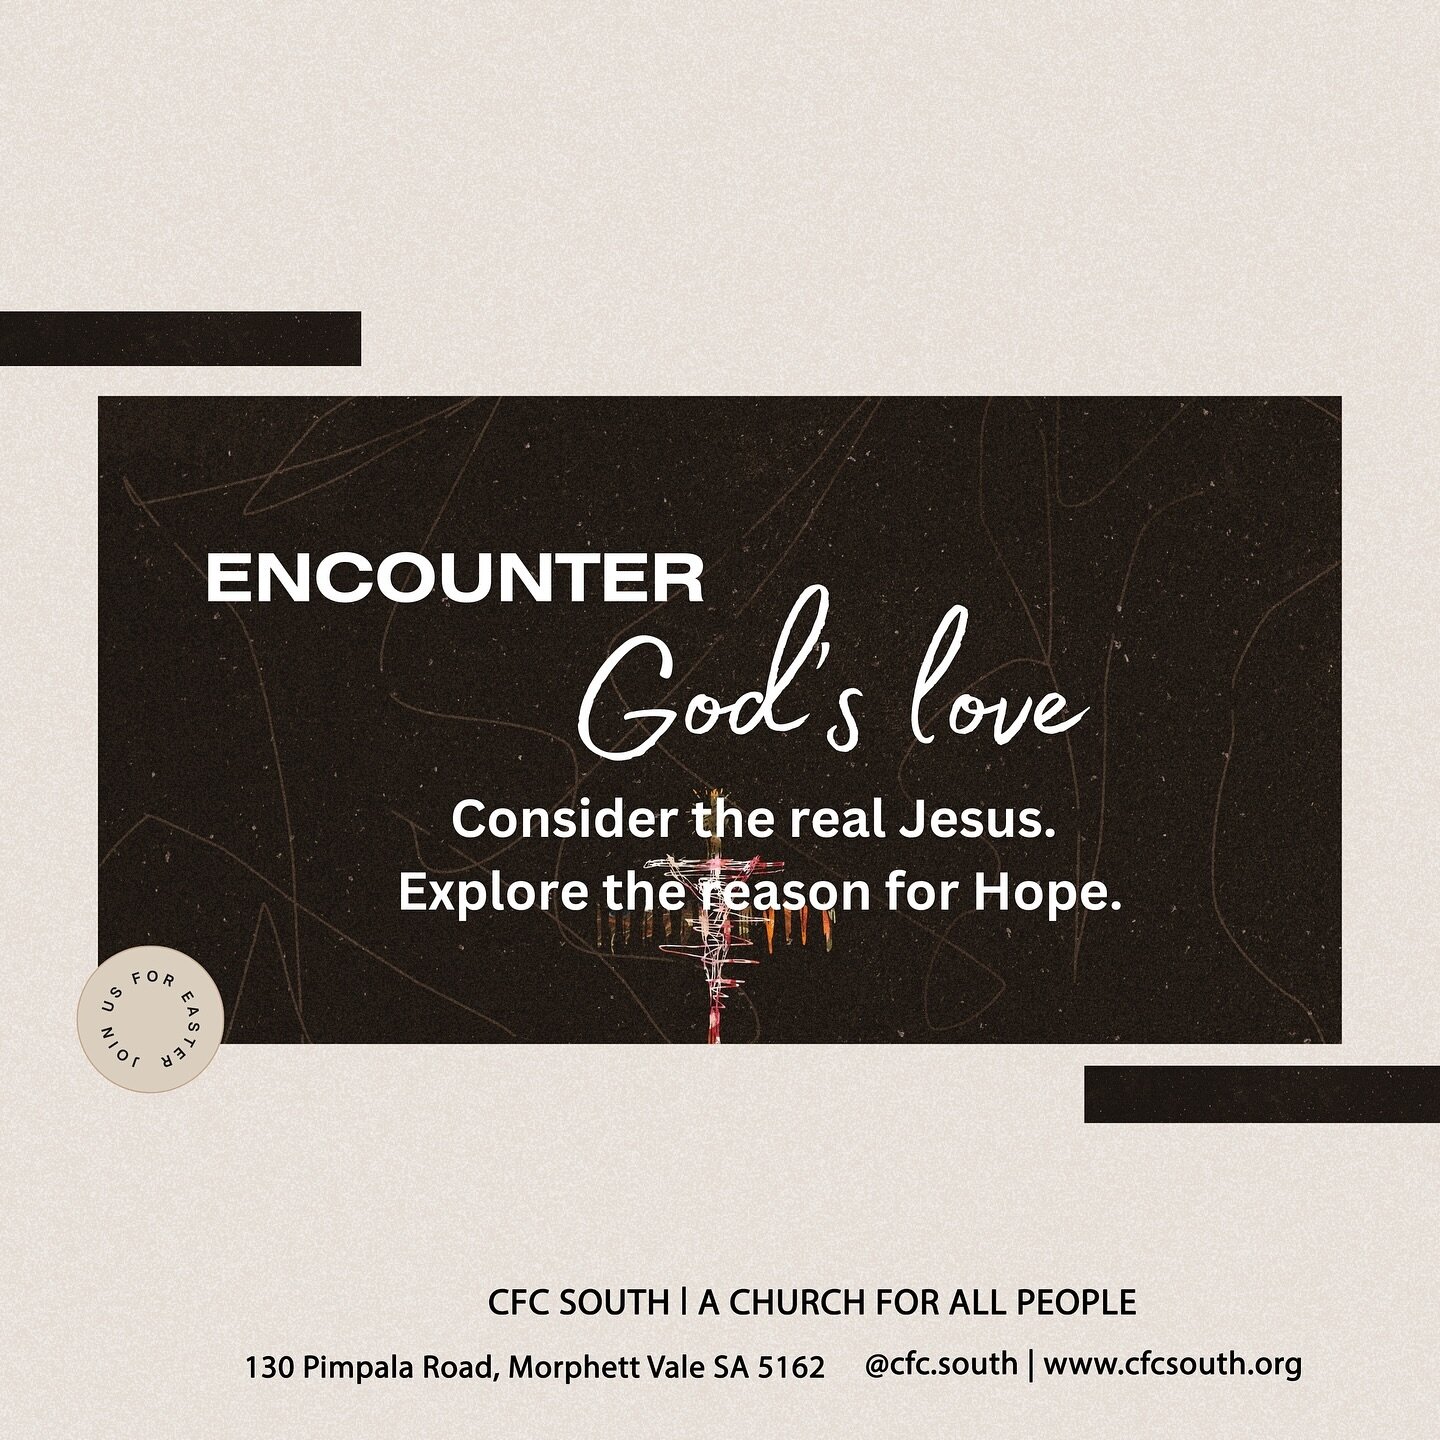 Join us this Easter @cfc.south 
Encounter God&rsquo;s Love.
Consider the real Jesus.
Explore the reason for Hope.

Good Friday, March 29th at 9am.
Inspiring Music.
An Easter Message, from Pastor David Bland.
Communion.
And after the service we invite